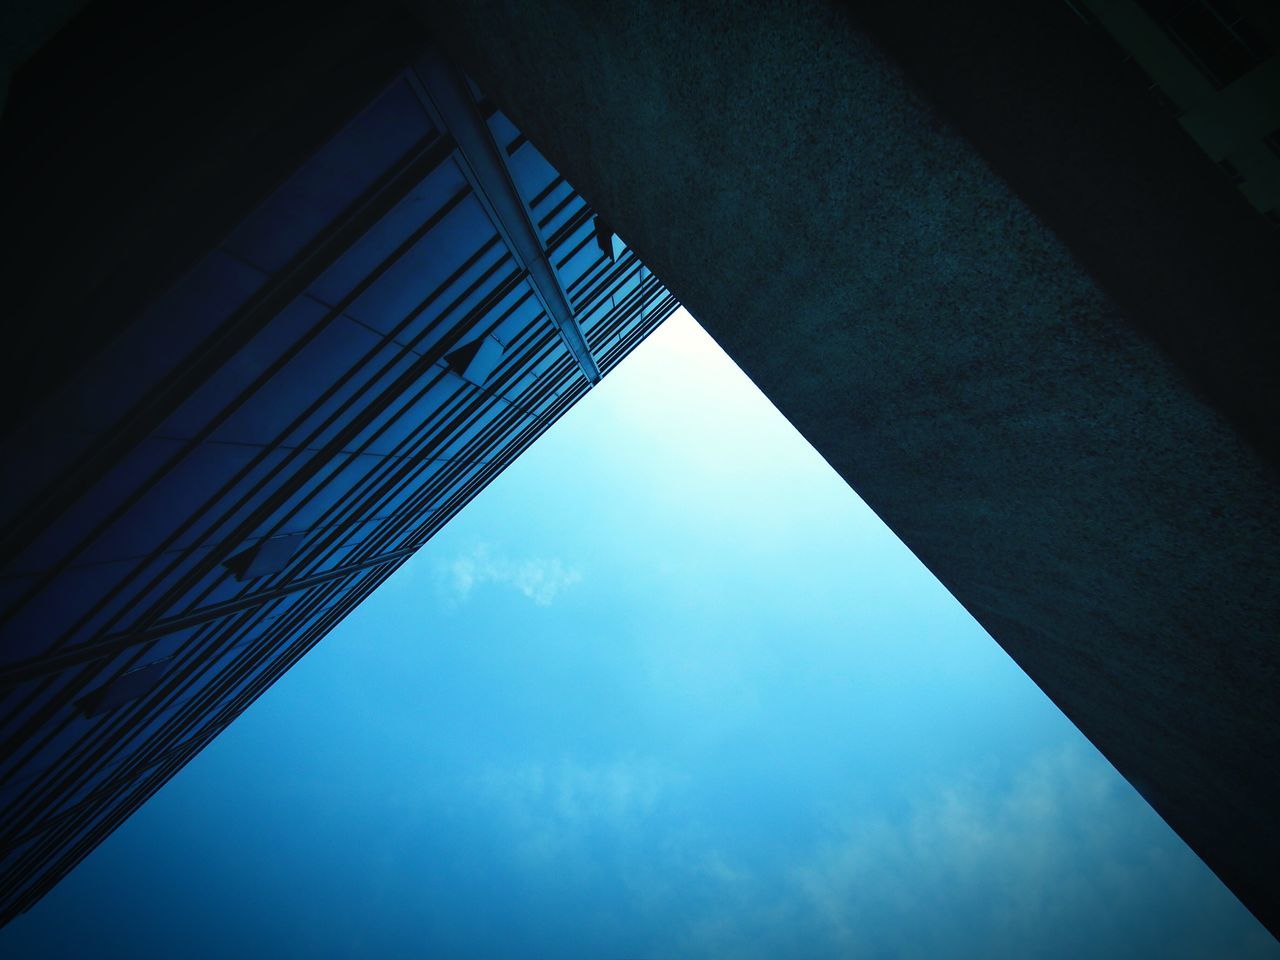 low angle view, architecture, built structure, sky, building exterior, reflection, modern, glass - material, cloud - sky, directly below, building, blue, office building, window, no people, tall - high, cloud, day, city, outdoors